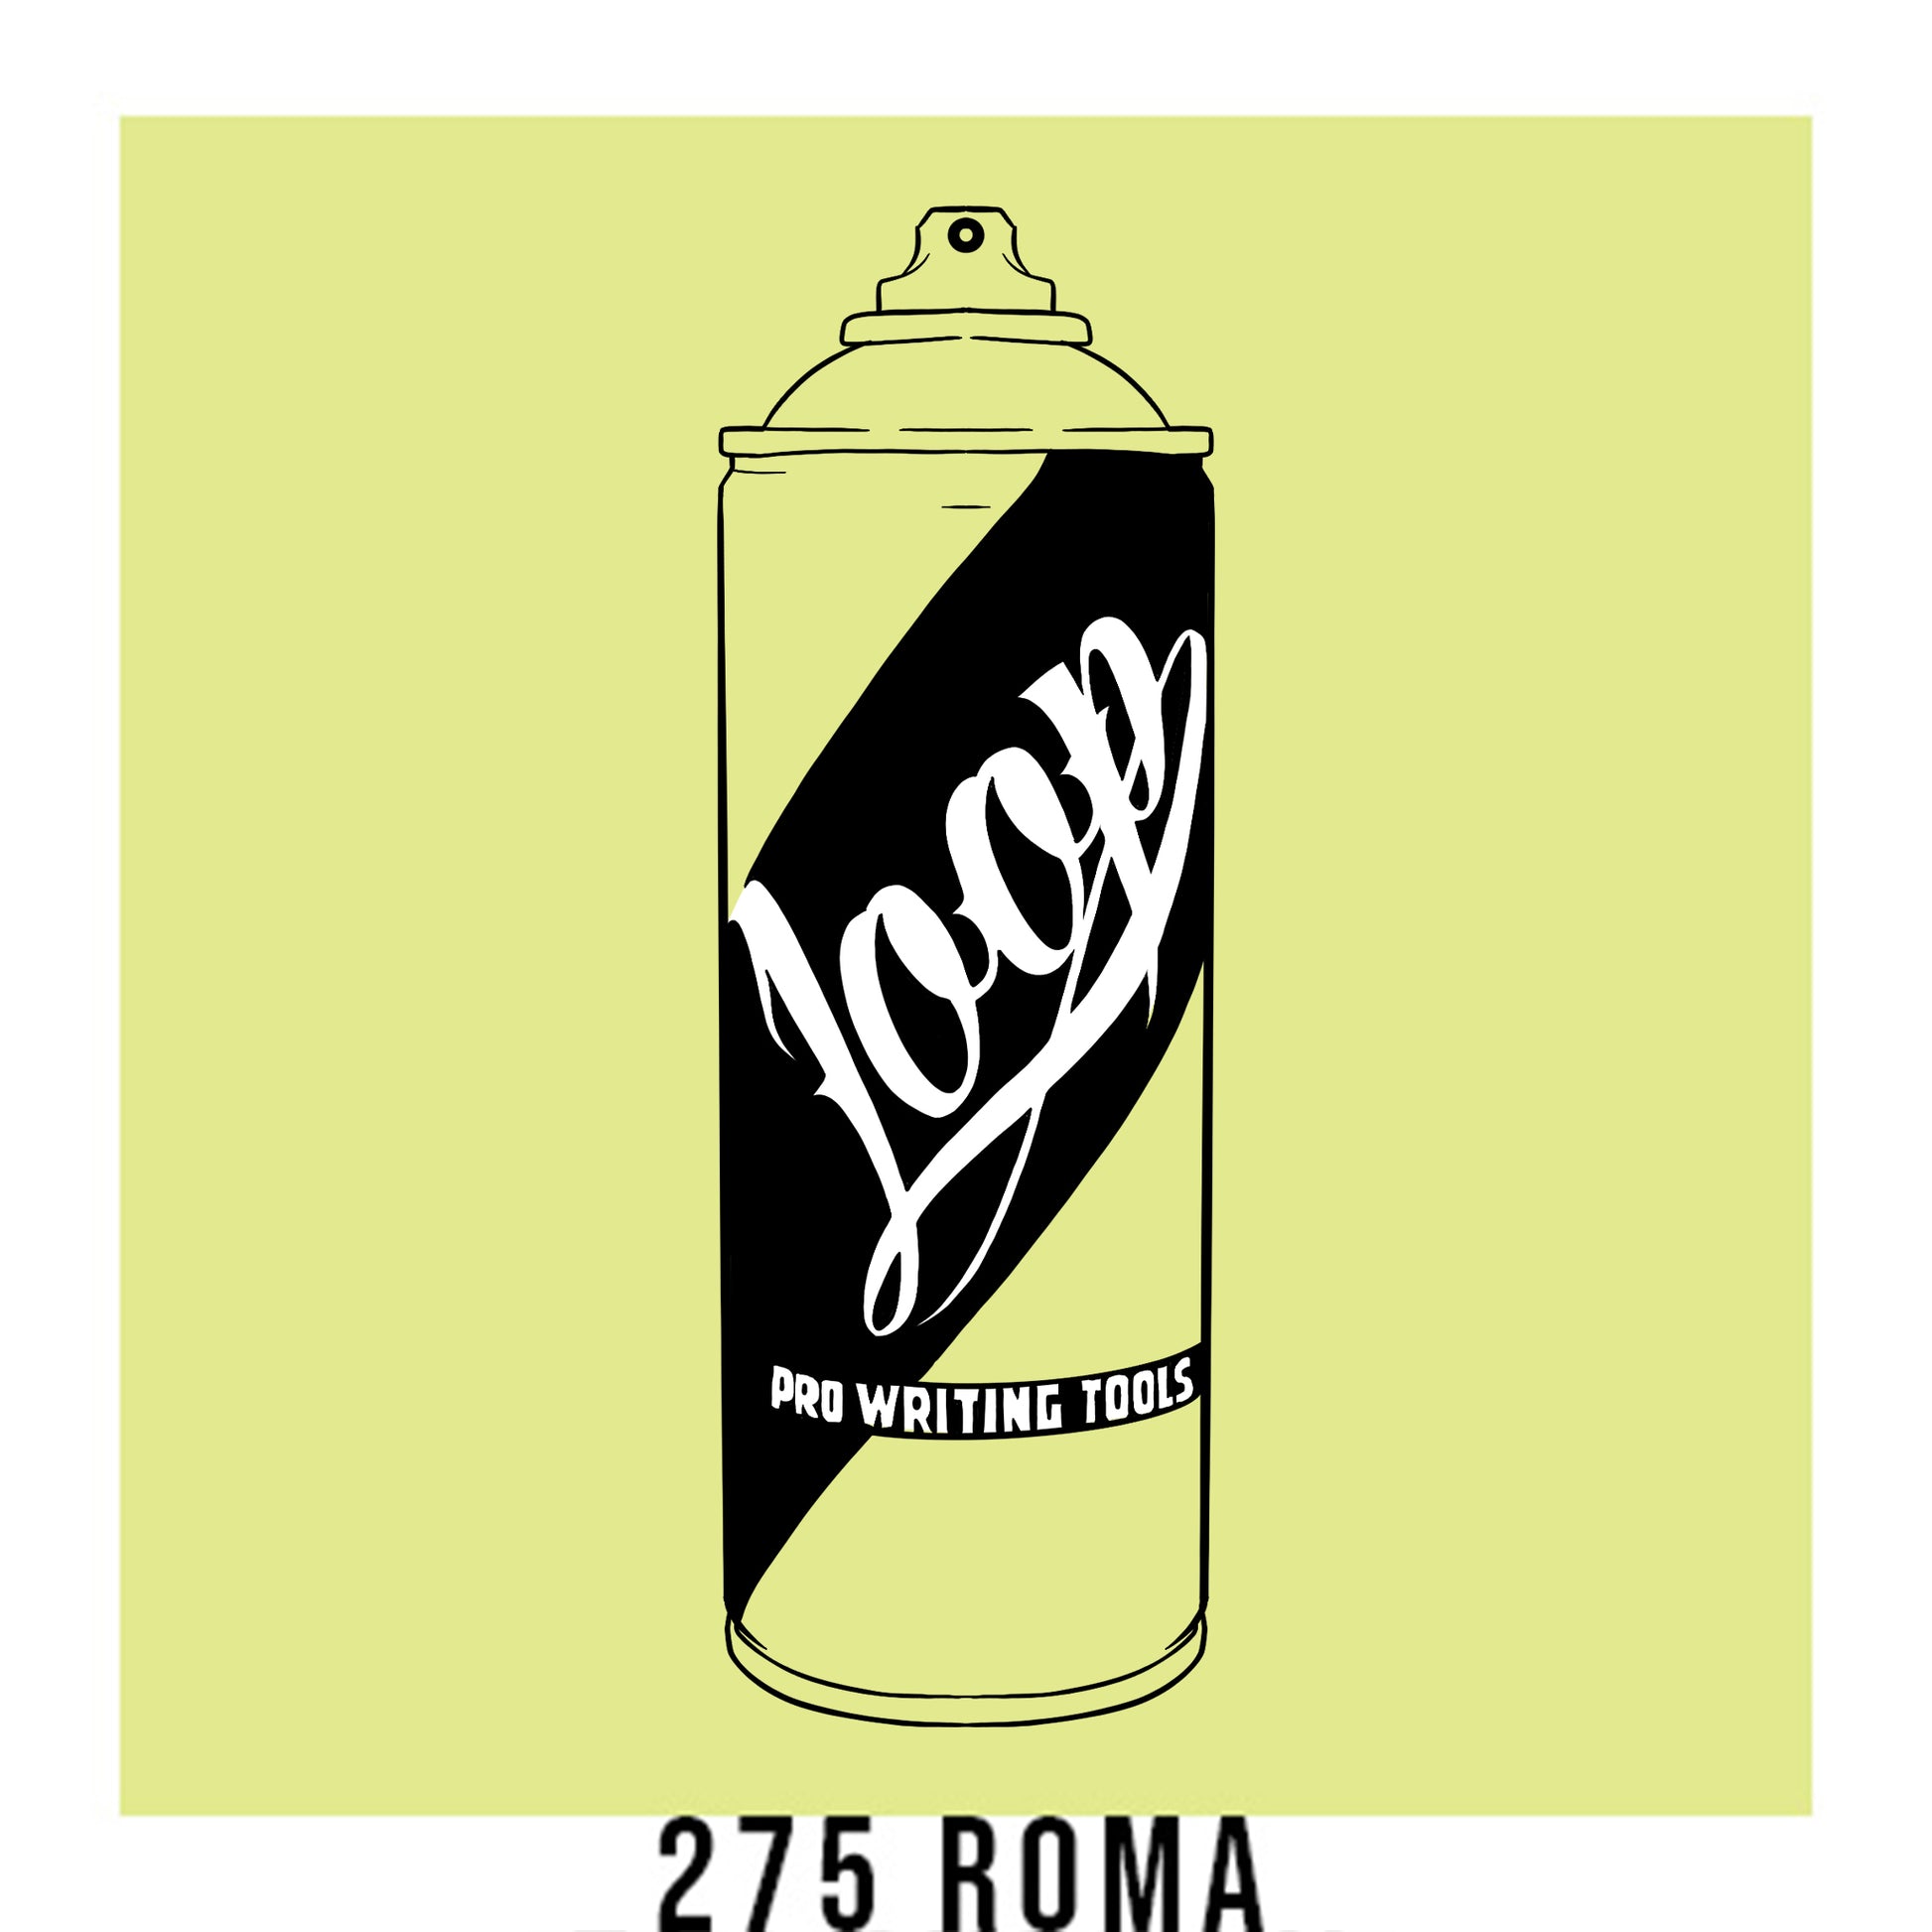 A black outline drawing of a pastel lime Green spray paint can with the word "Loop" written on the face in script. The background is a color swatch of the same pastel lime green with a white border with the words "275 Roma" at the bottom.